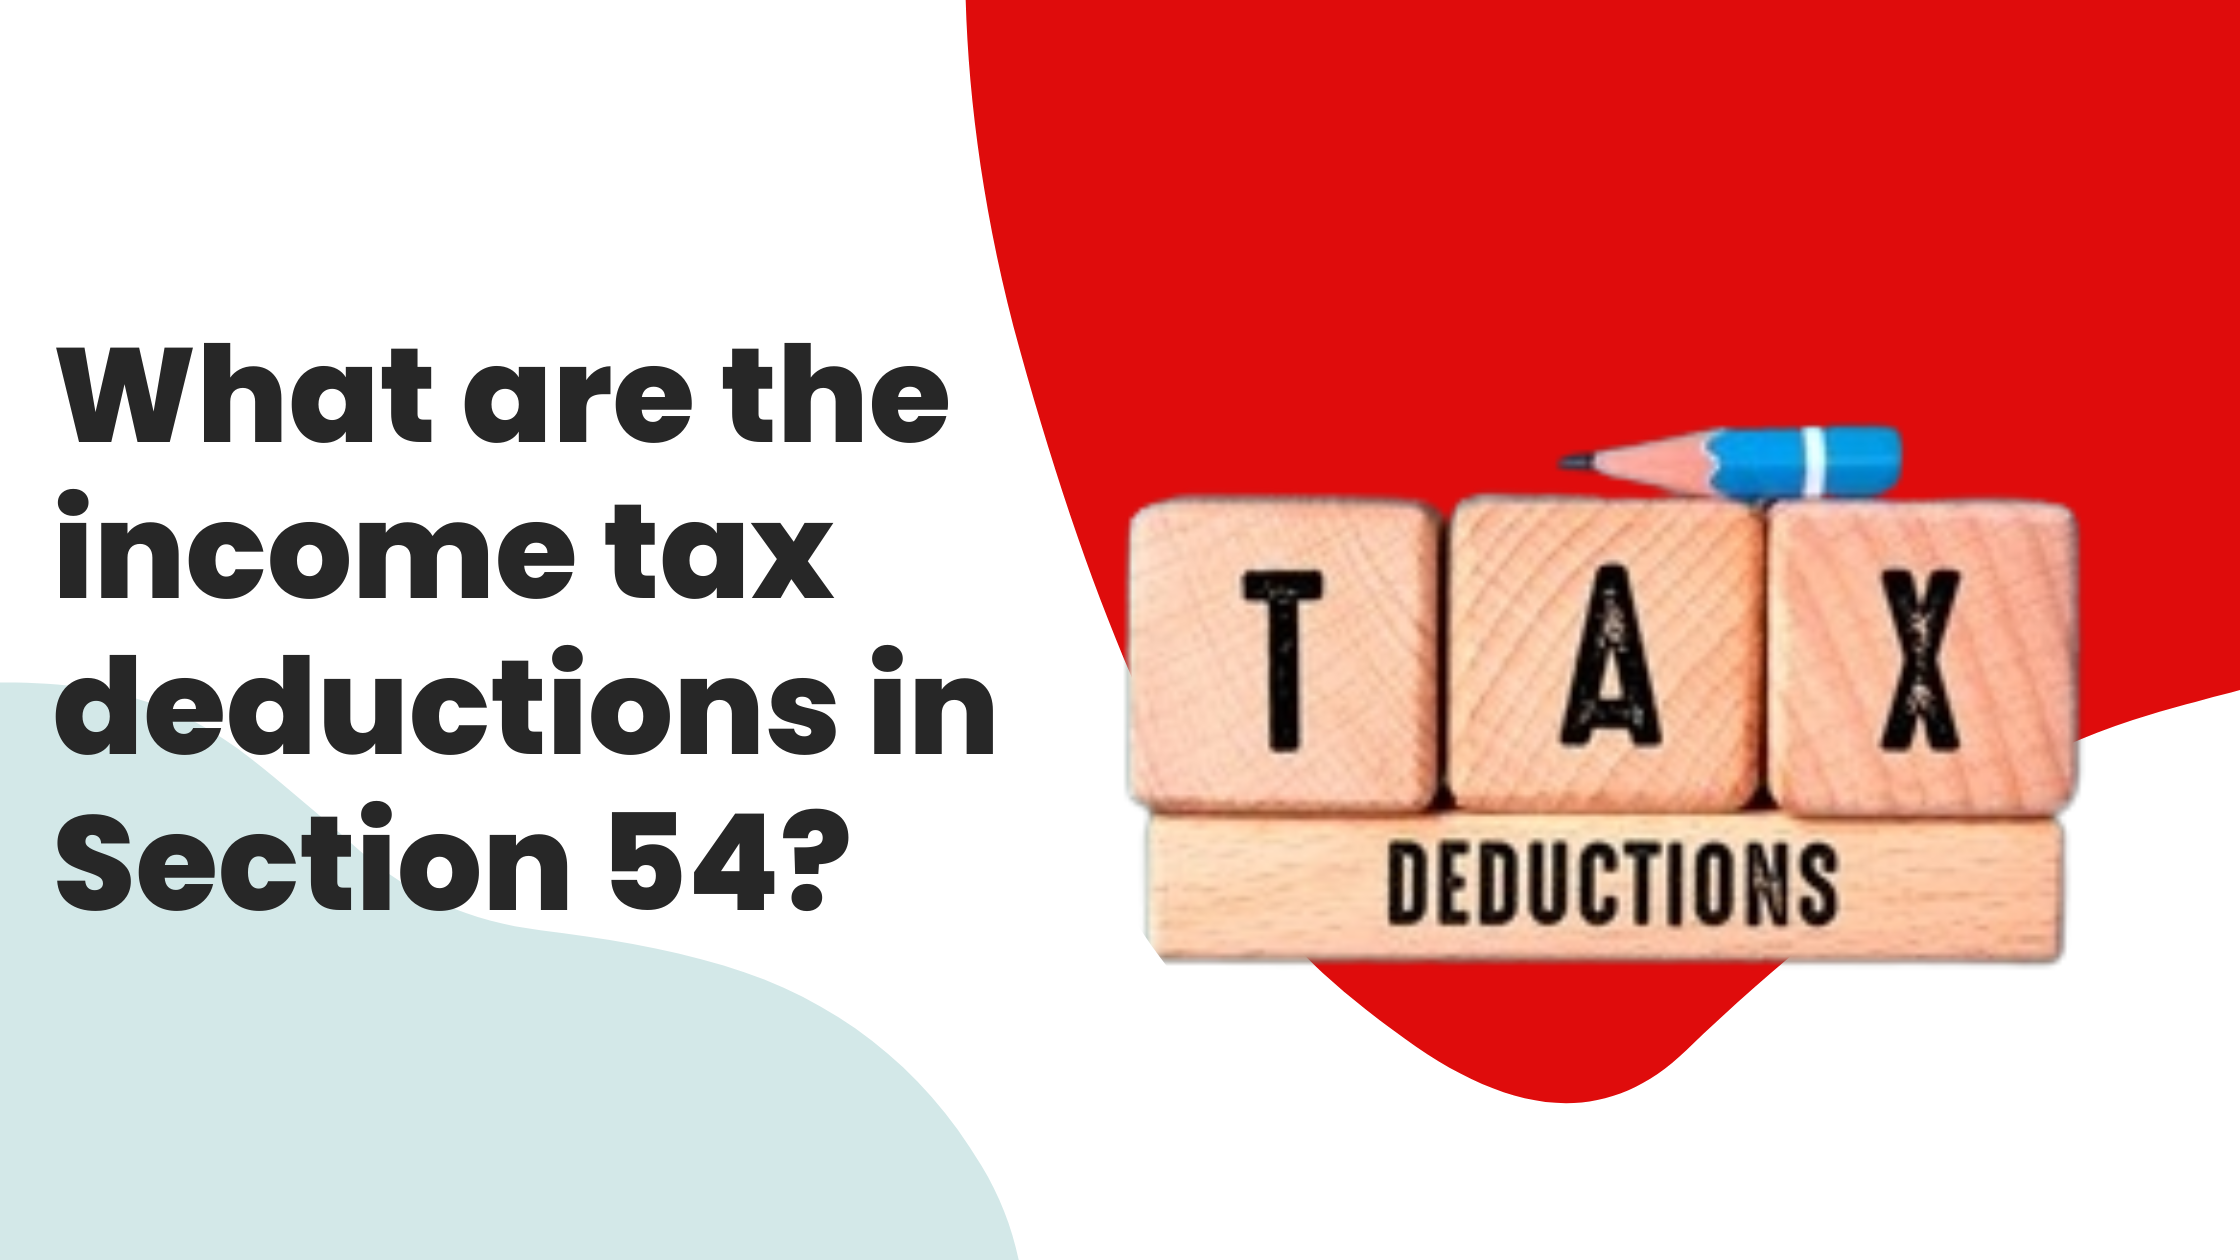 What are the income tax deductions in Section 54?